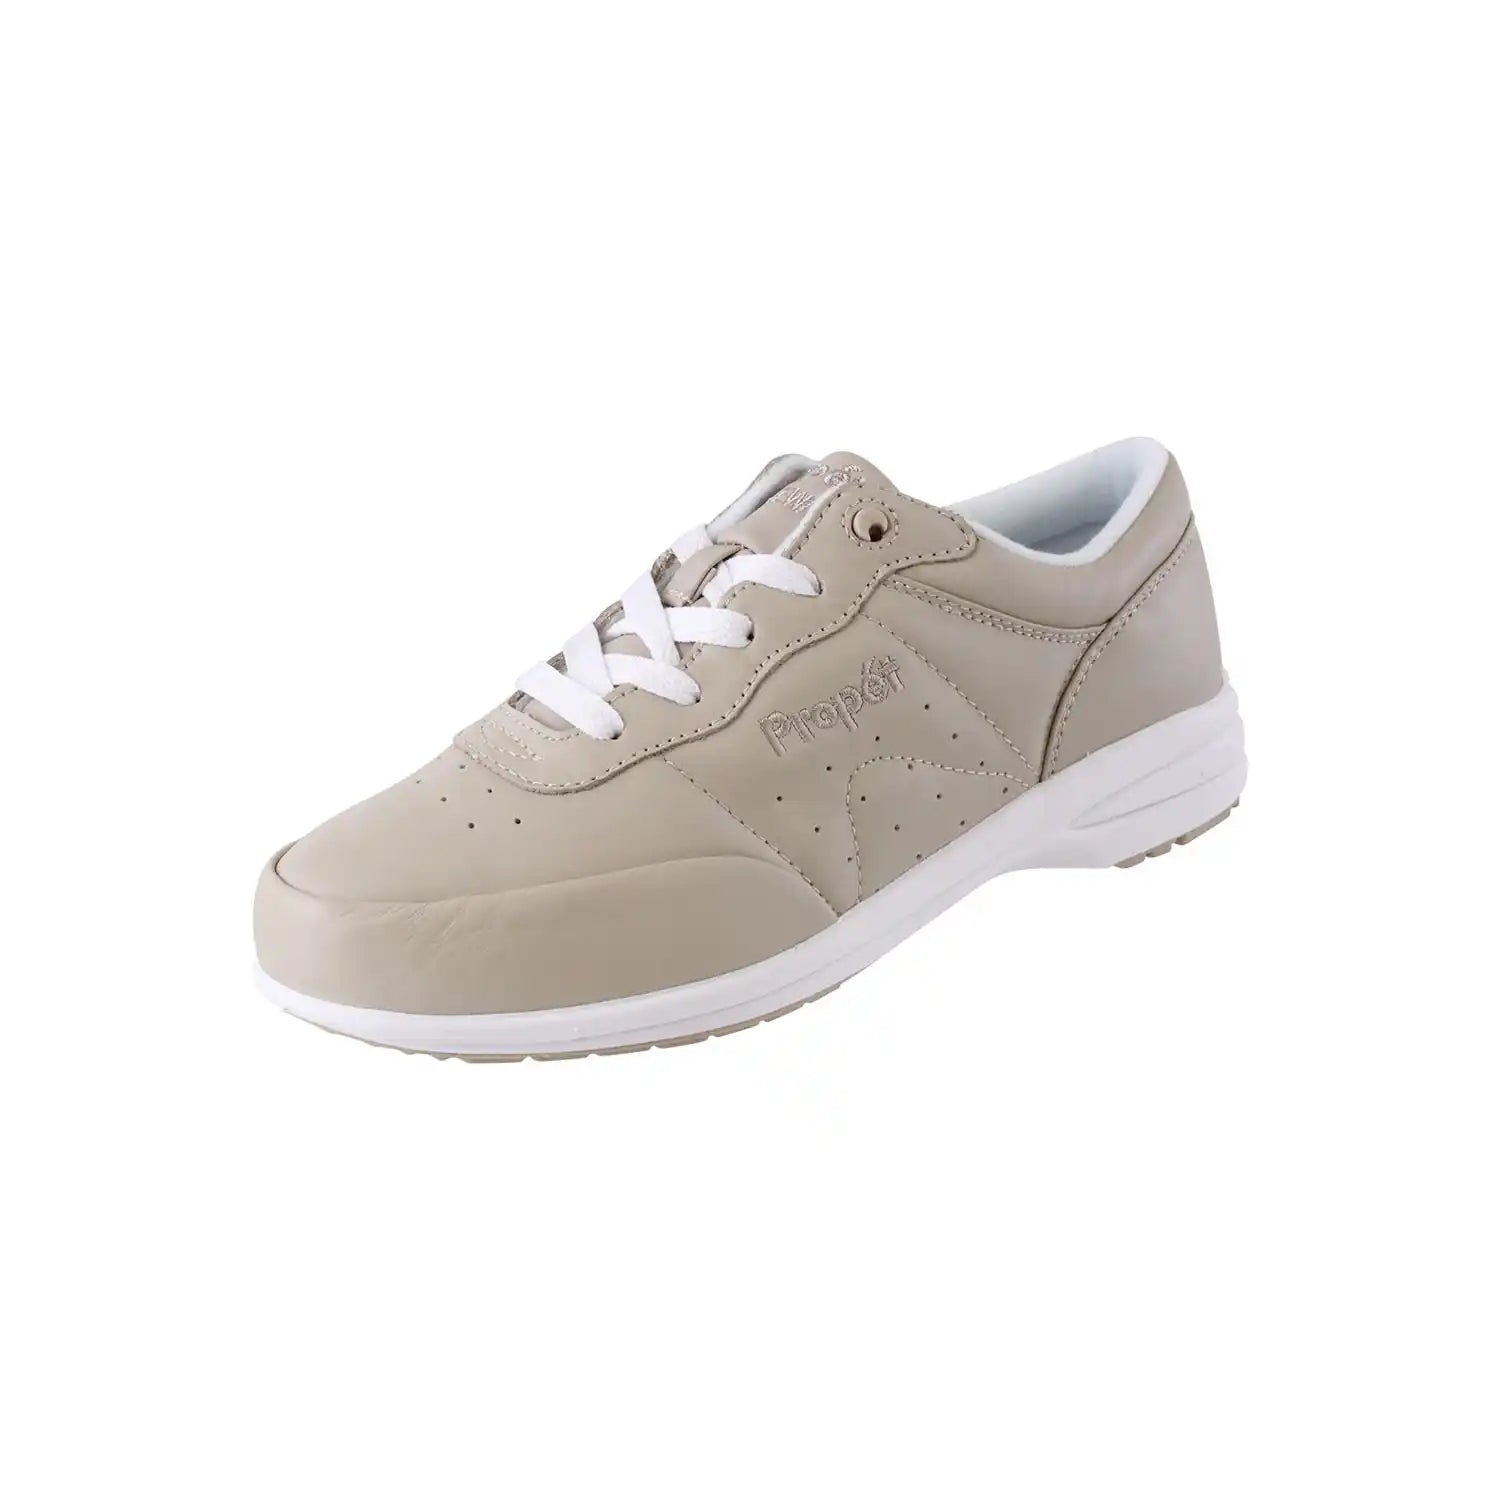 Propet Bone Leather Trainers - White 1 Shaws Department Stores